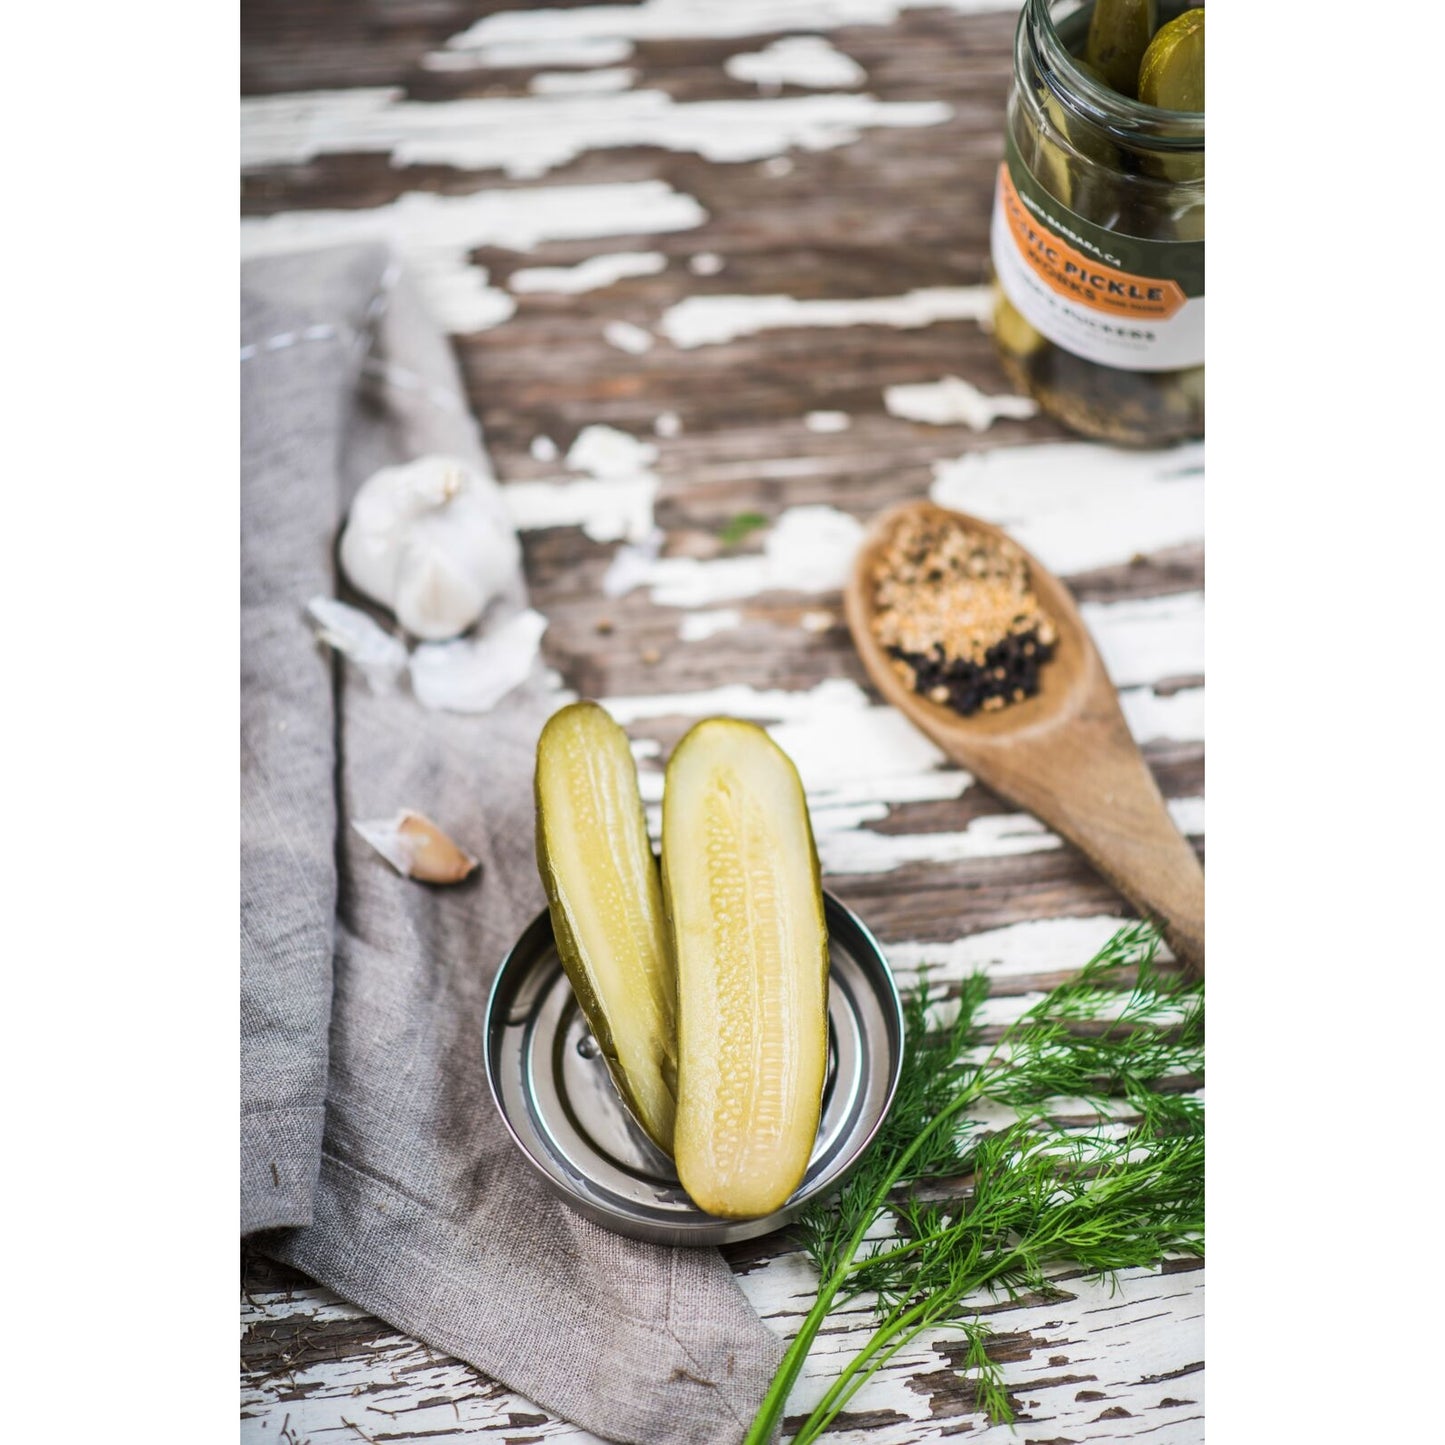 Mother's Puckers - Home-style Garlic Dill Pickles